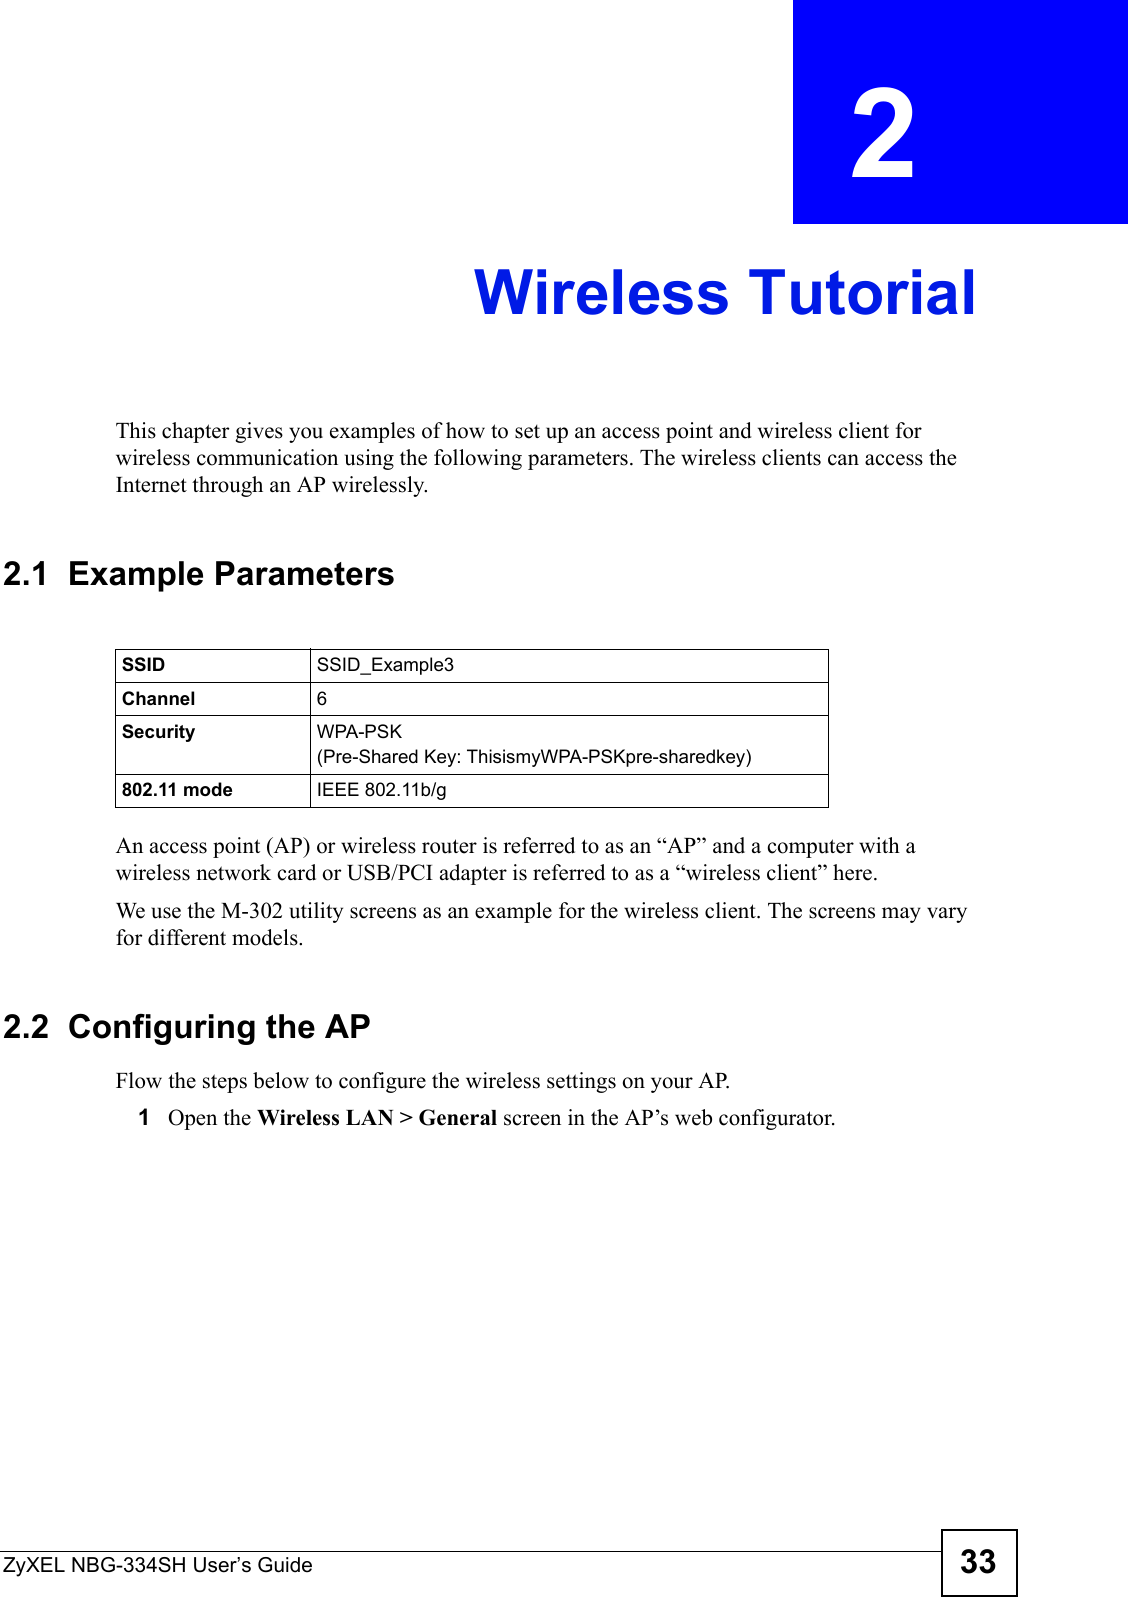 ZyXEL NBG-334SH User’s Guide 33CHAPTER  2 Wireless TutorialThis chapter gives you examples of how to set up an access point and wireless client for wireless communication using the following parameters. The wireless clients can access the Internet through an AP wirelessly.2.1  Example ParametersAn access point (AP) or wireless router is referred to as an “AP” and a computer with a wireless network card or USB/PCI adapter is referred to as a “wireless client” here.We use the M-302 utility screens as an example for the wireless client. The screens may vary for different models.2.2  Configuring the APFlow the steps below to configure the wireless settings on your AP.1Open the Wireless LAN &gt; General screen in the AP’s web configurator.SSID SSID_Example3Channel 6Security  WPA-PSK(Pre-Shared Key: ThisismyWPA-PSKpre-sharedkey)802.11 mode IEEE 802.11b/g